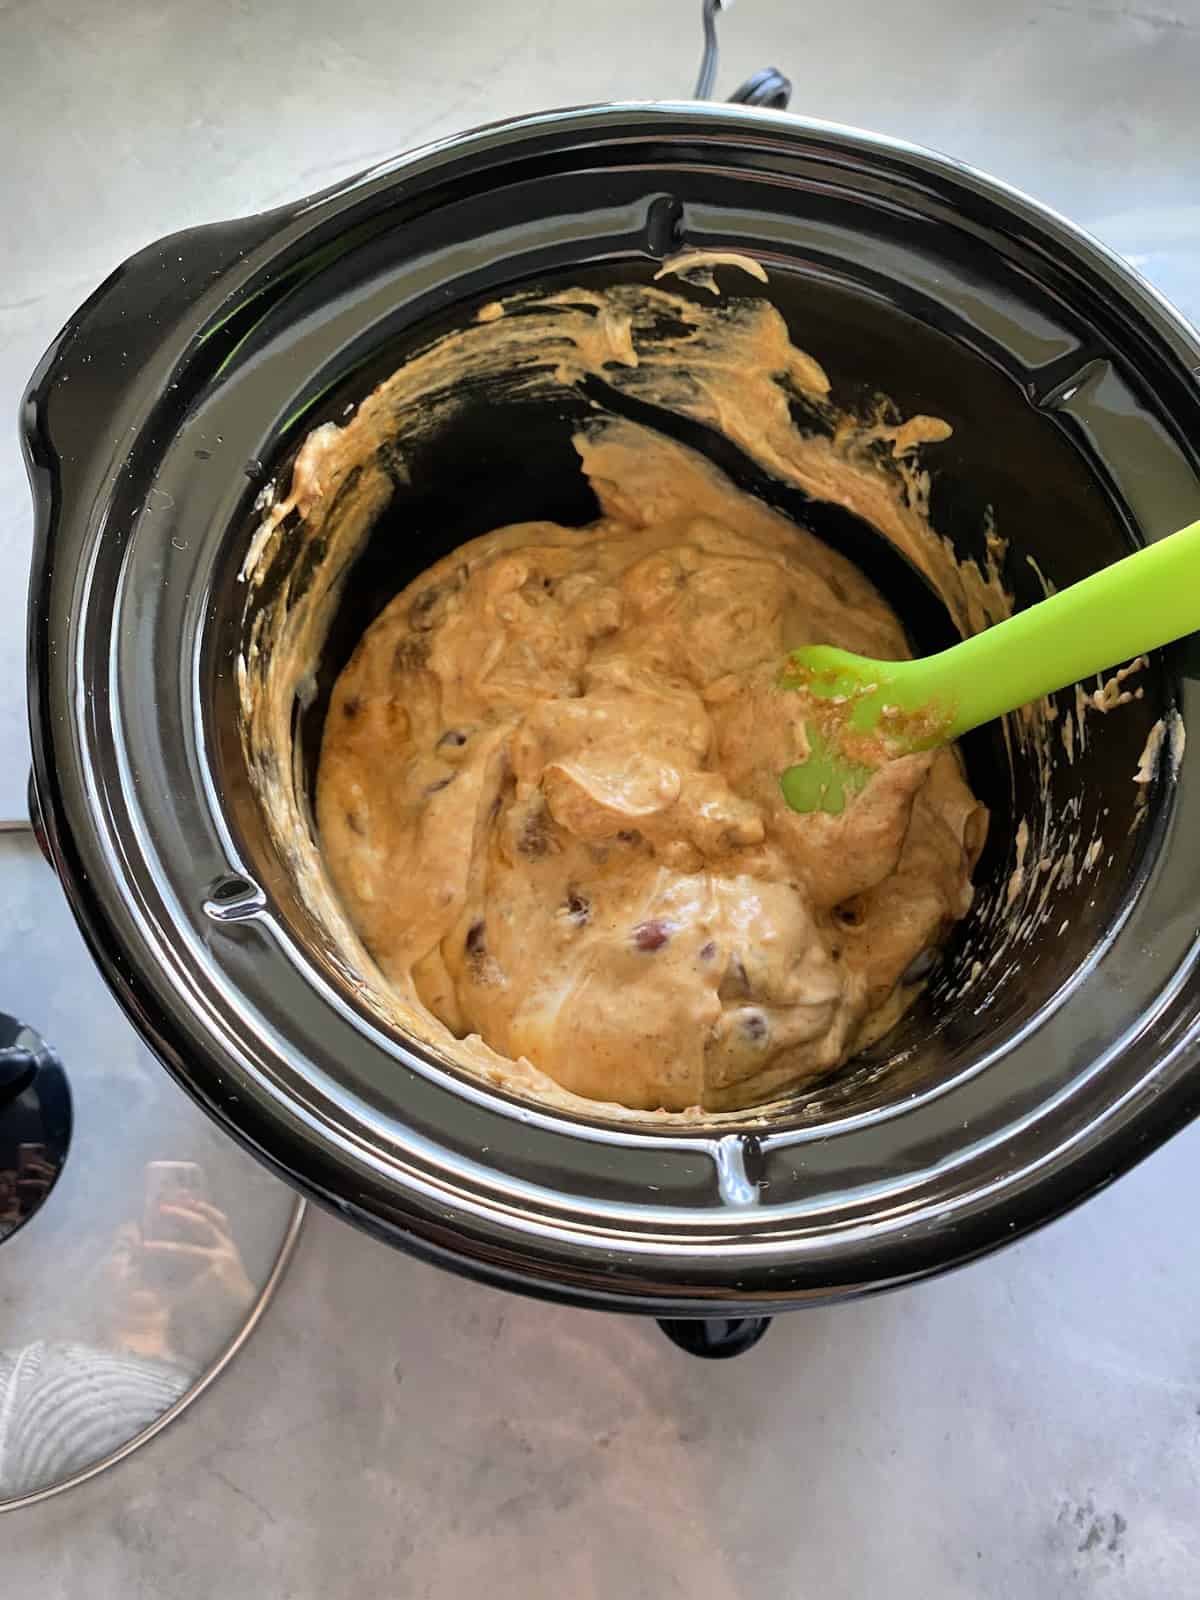 Top view of Chili Cheese Dip being stirred with spatula in a mini Crock Pot.